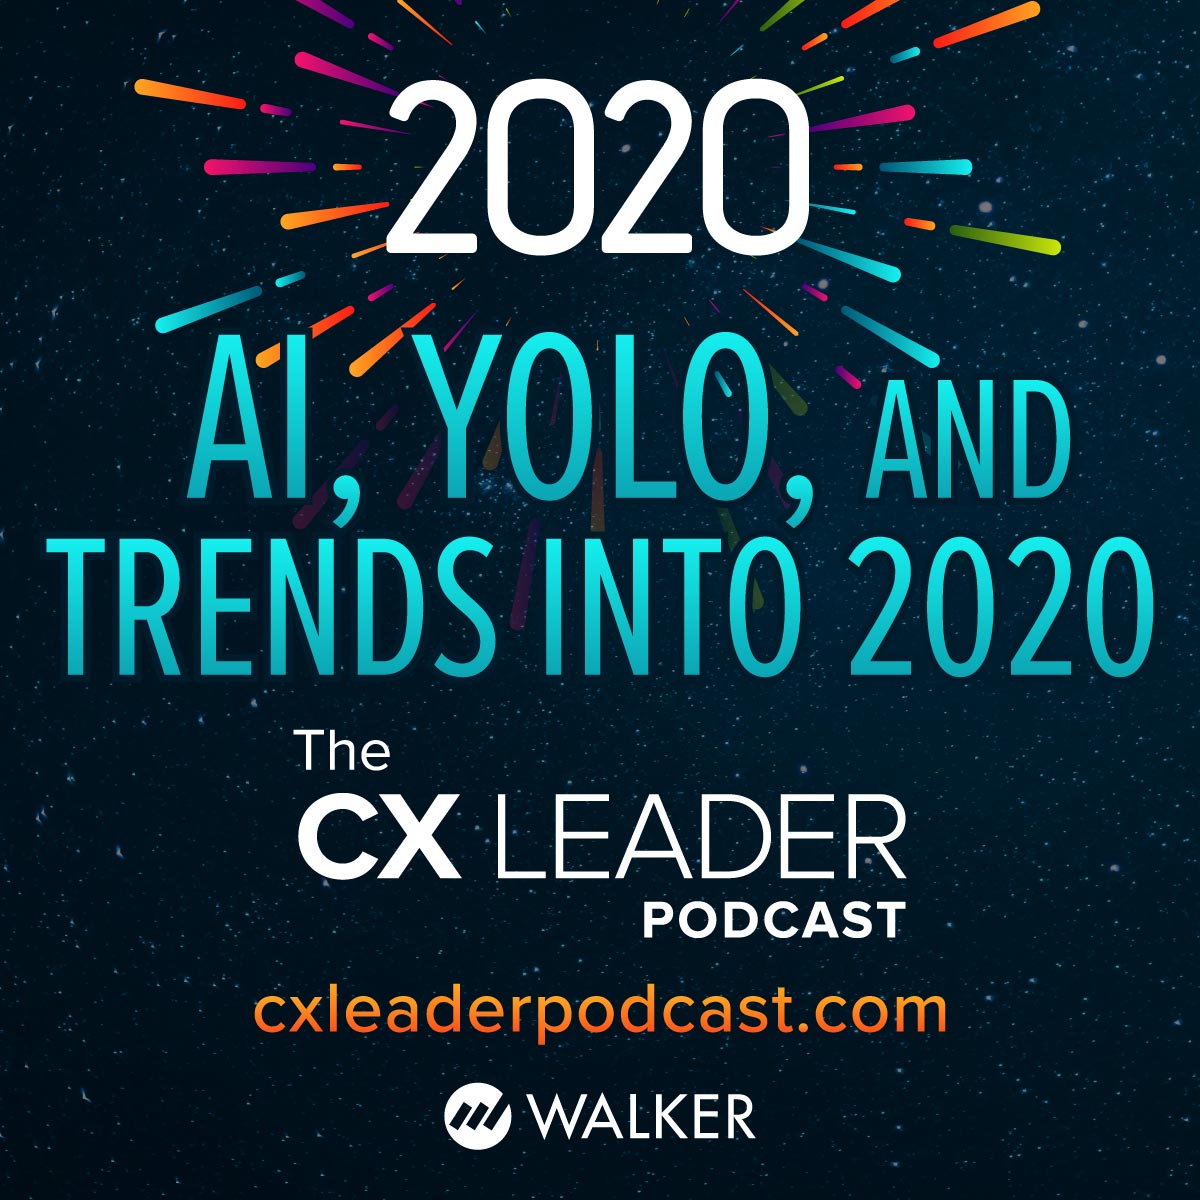 AI, YOLO, and Trends into 2020